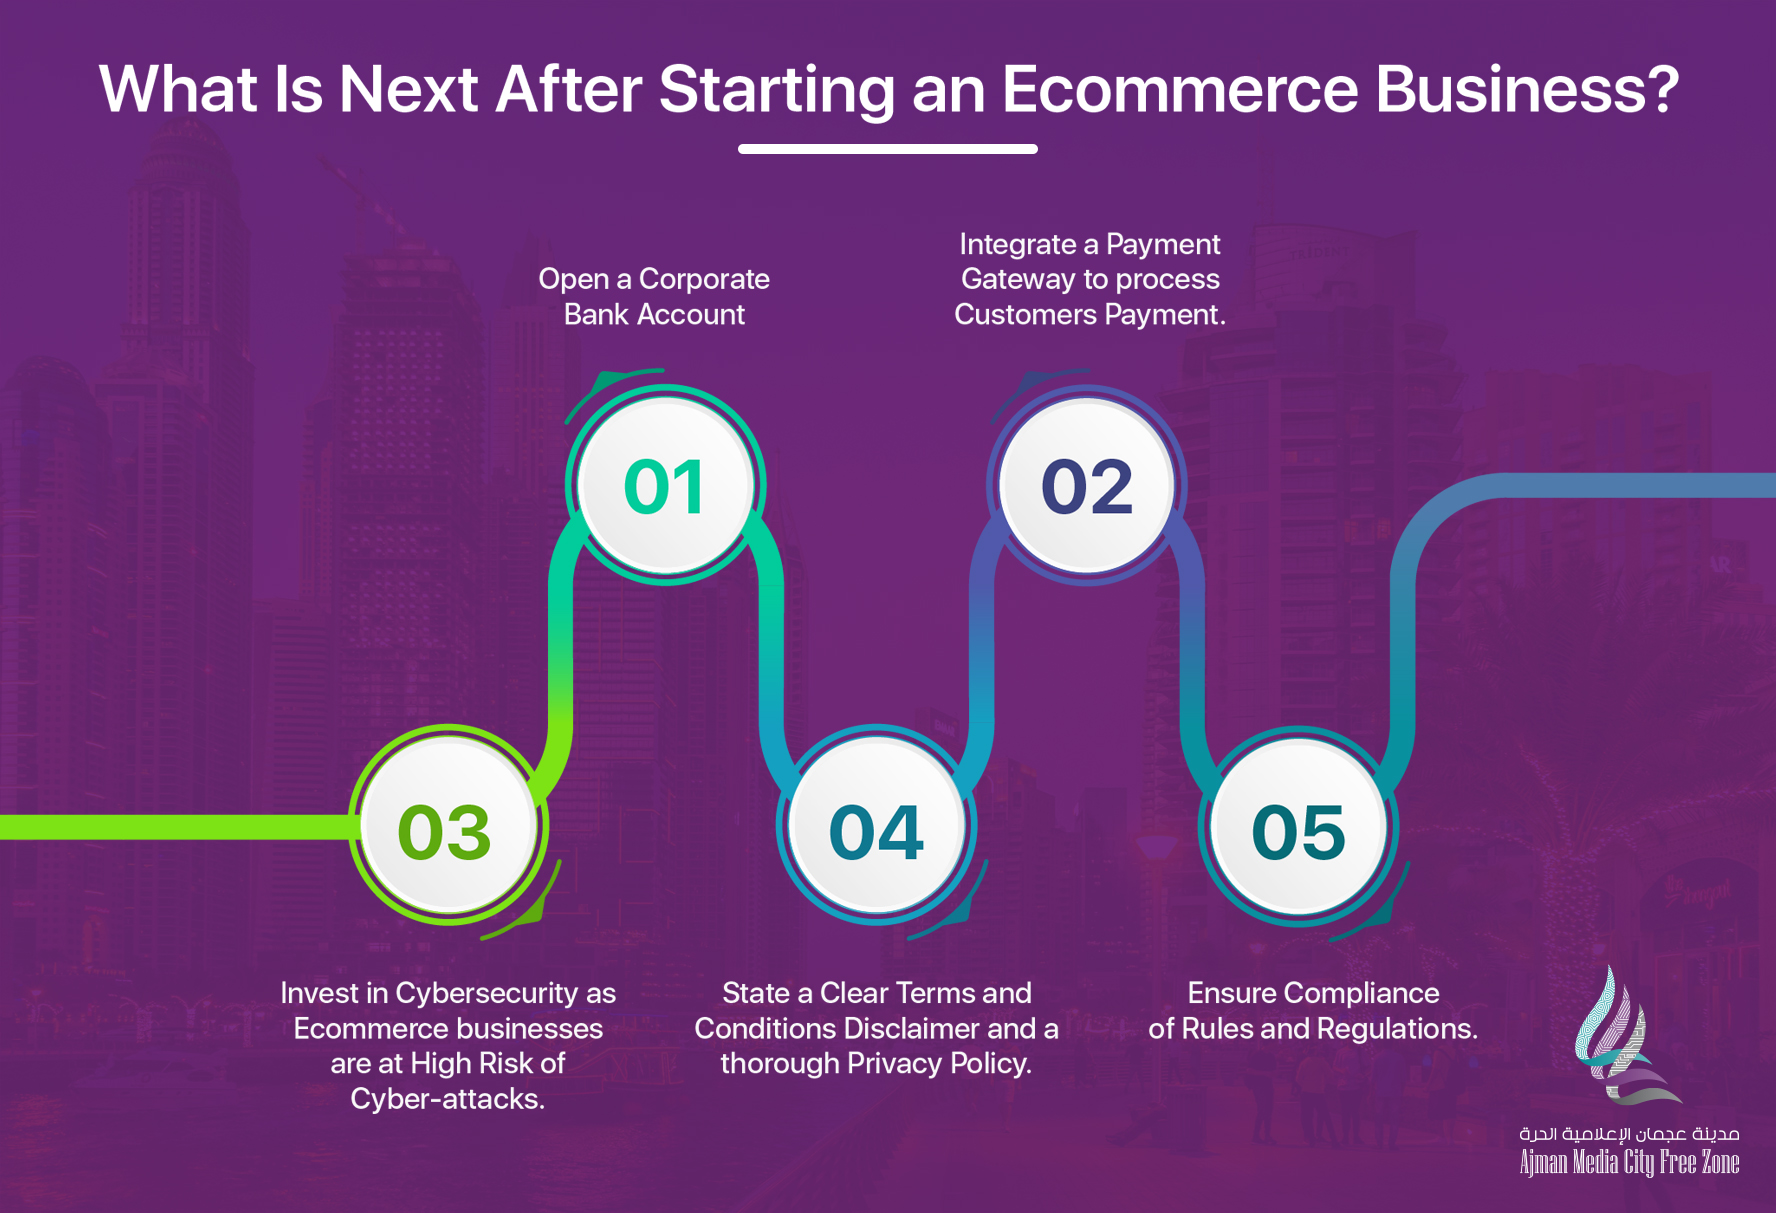 What Is Next After Starting an Ecommerce Business